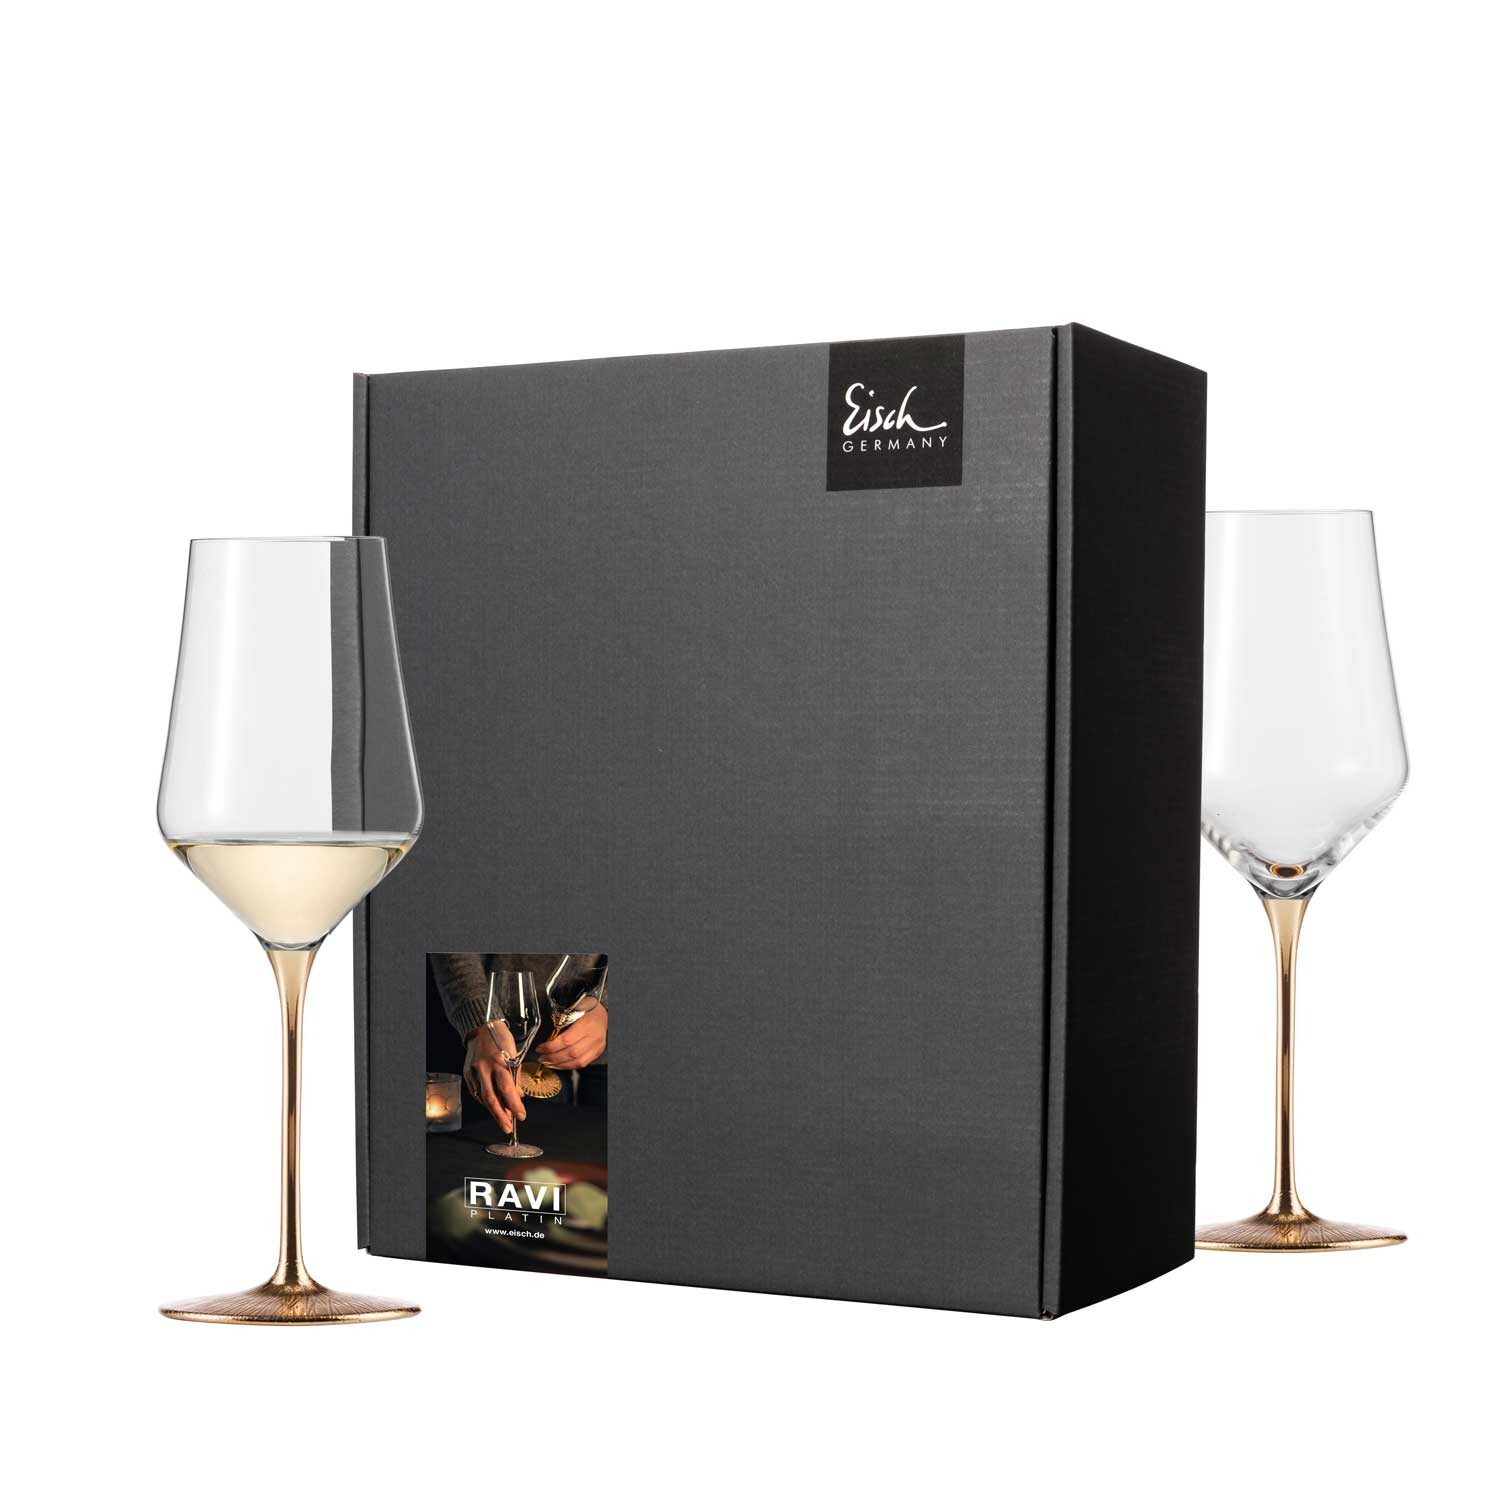 RAVI GOLD 2 white wine crystal glasses in a gift box